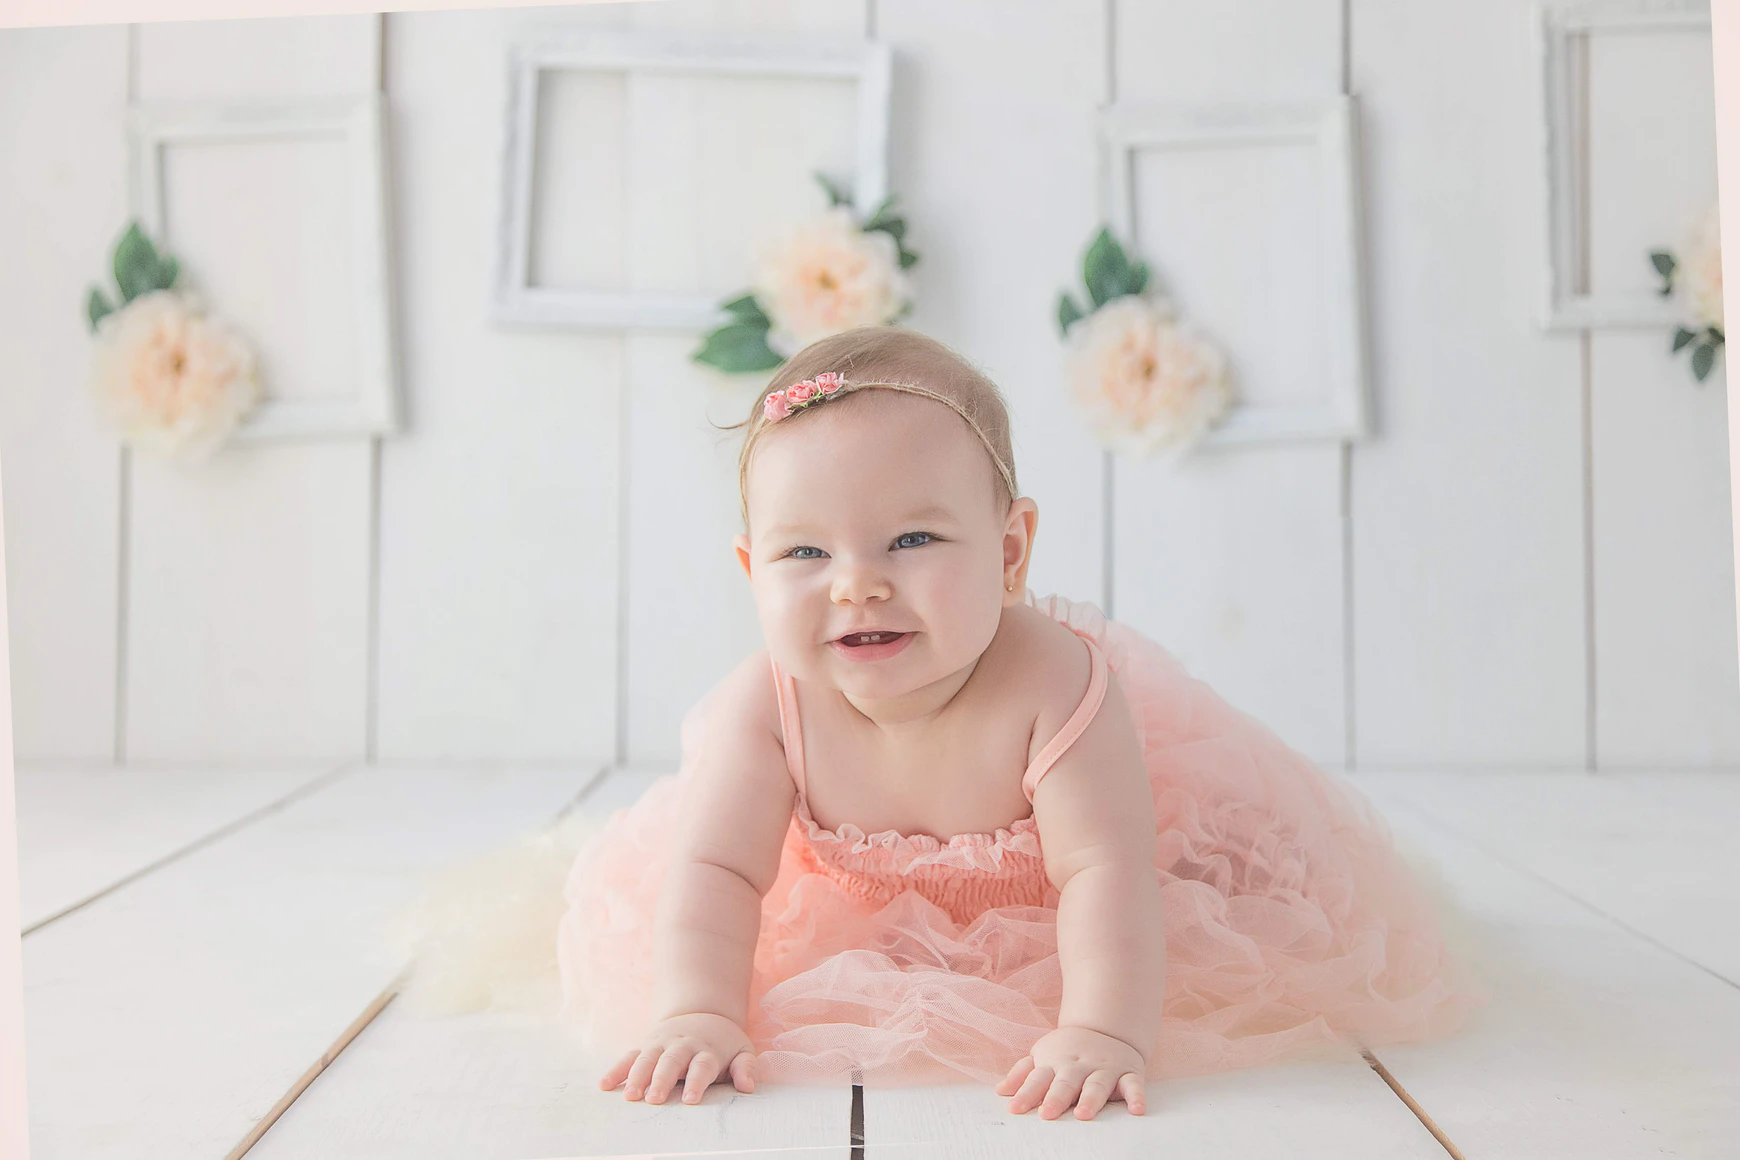 A smiling baby girls crawls on the floor. | Source: Unsplash